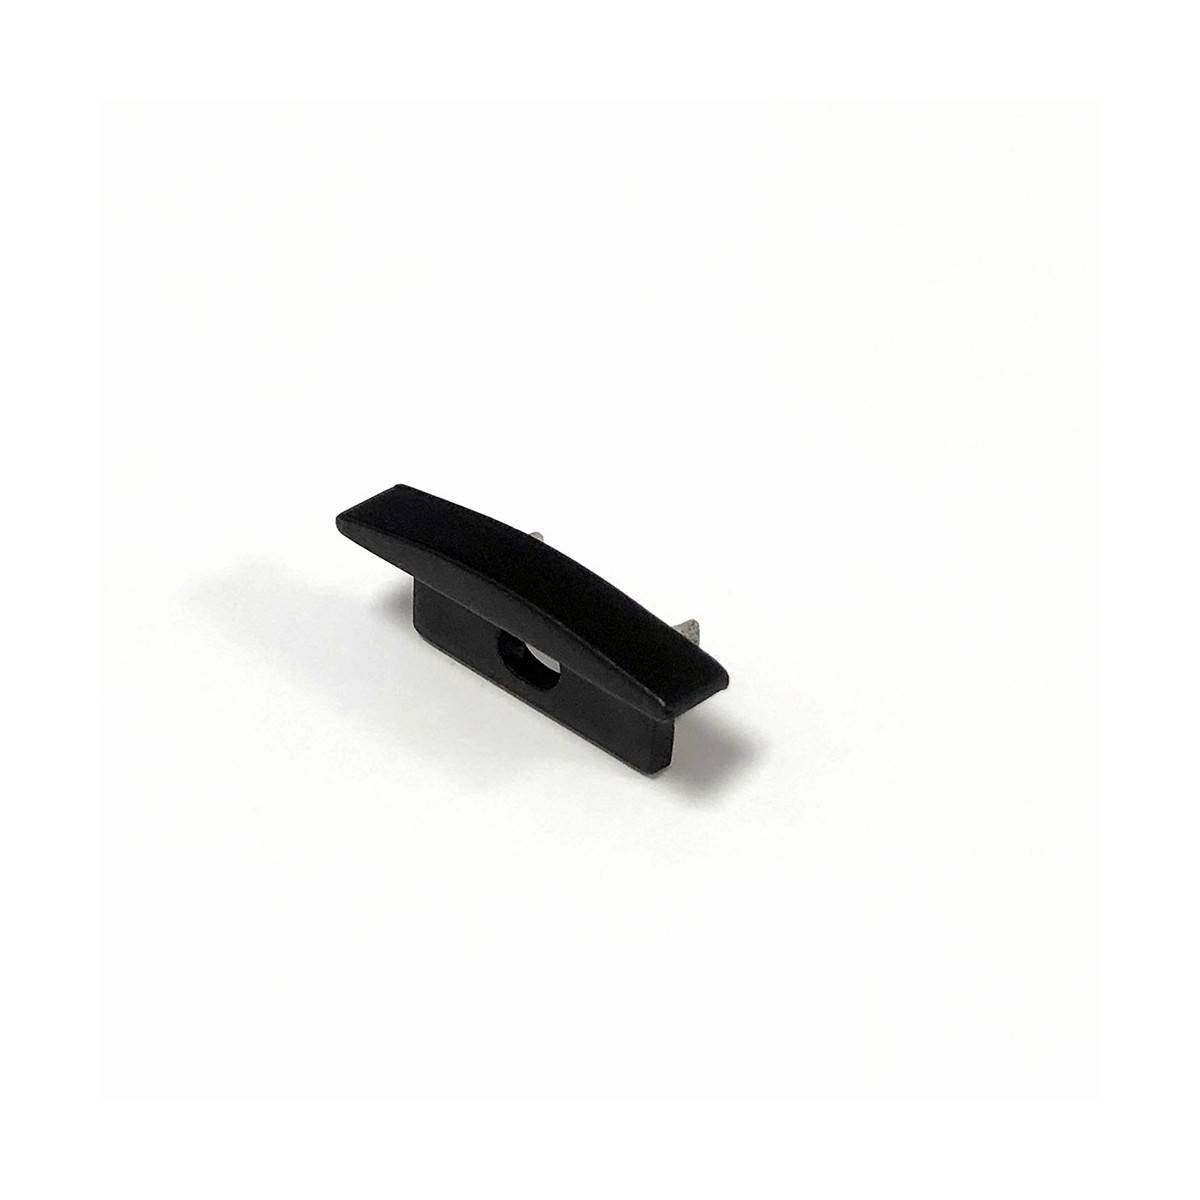 Side cover for profile 23x8mm with hole (BPERF23X8)